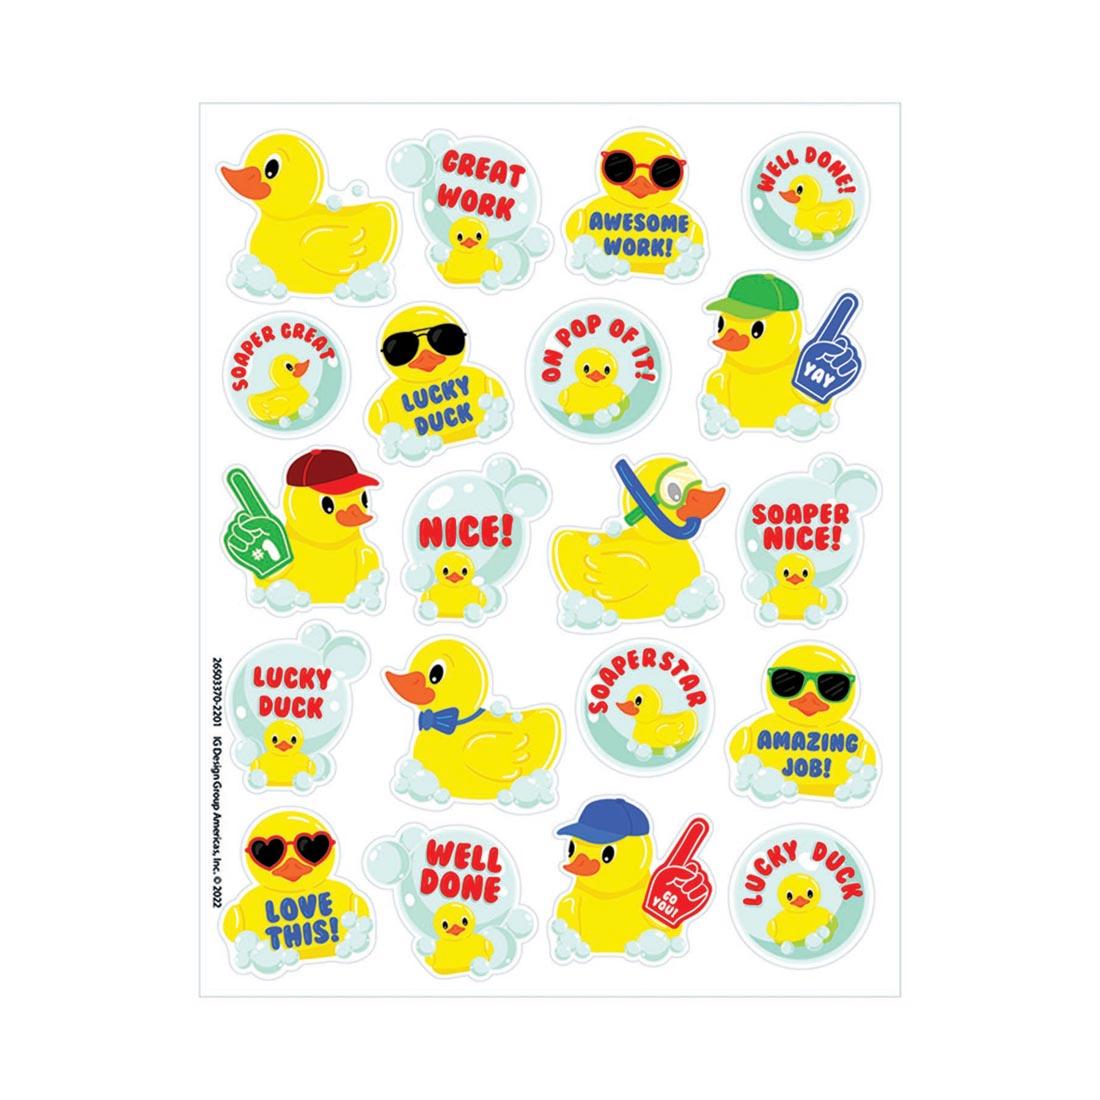 sample sheet of Rubber Duckies Bubble Bath Scented Stickers By Eureka, featuring yellow ducks, some with positive phrases